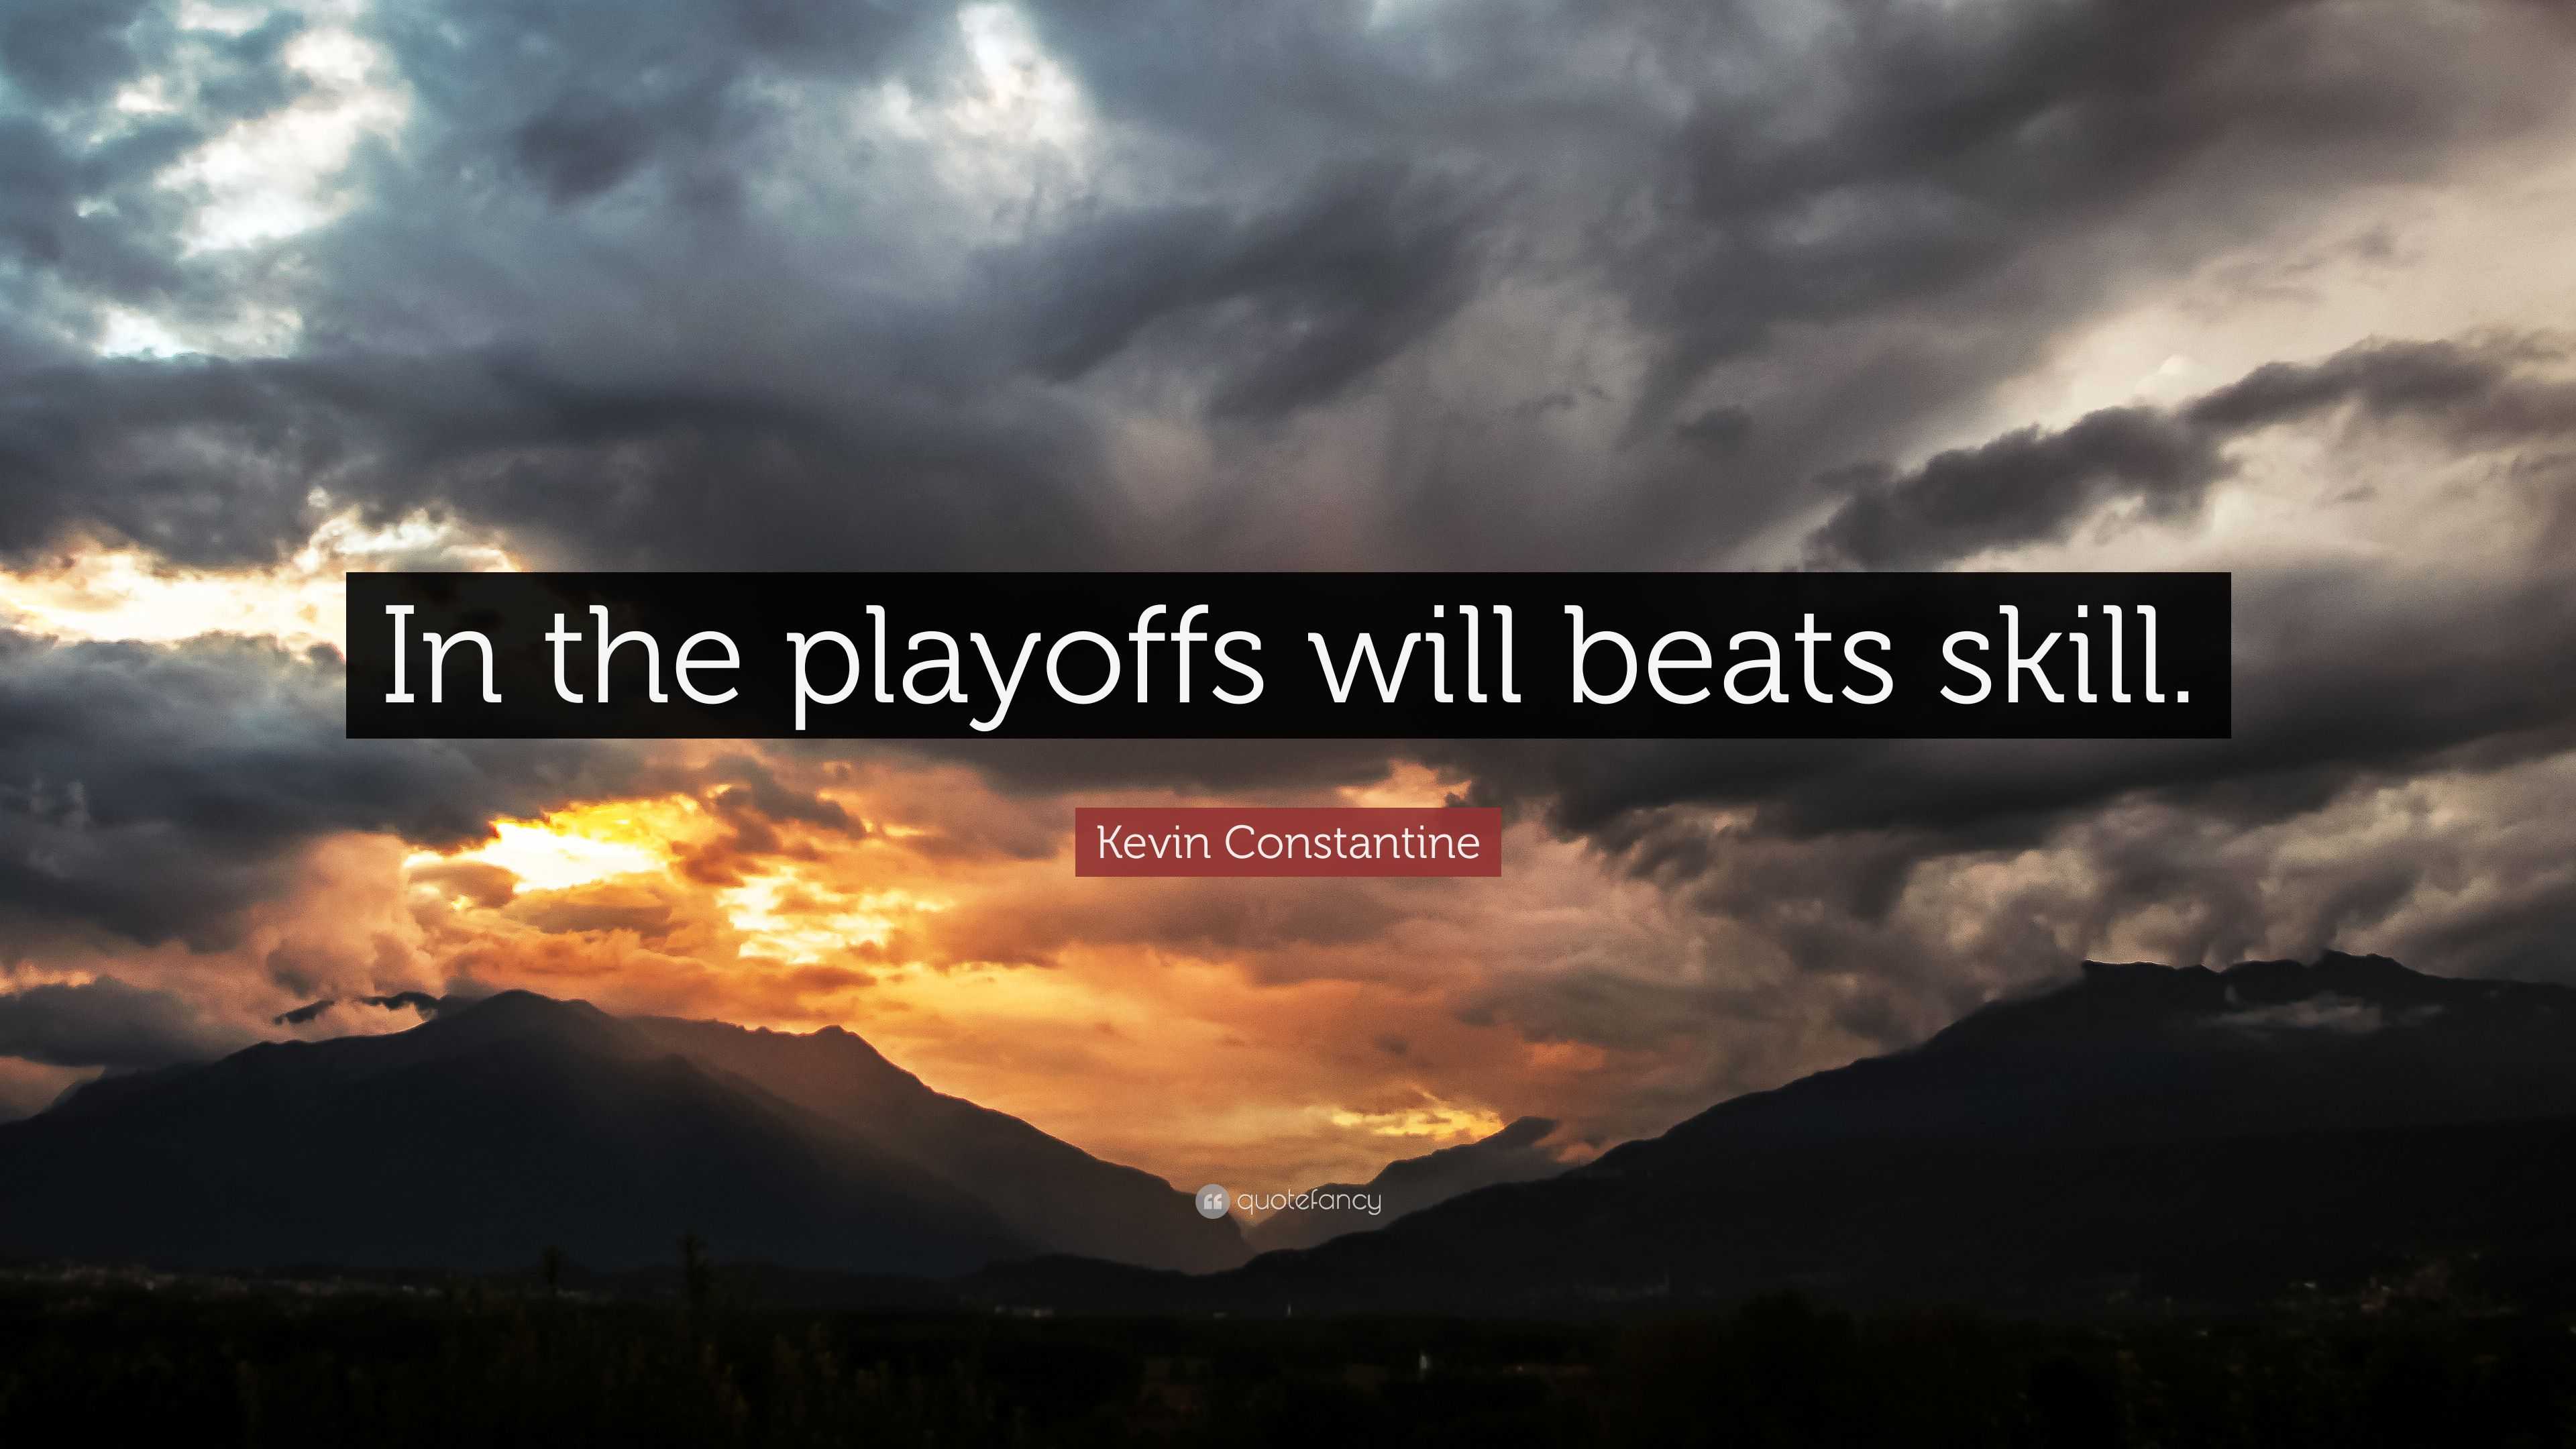 2305433-Kevin-Constantine-Quote-In-the-playoffs-will-beats-skill.jpg